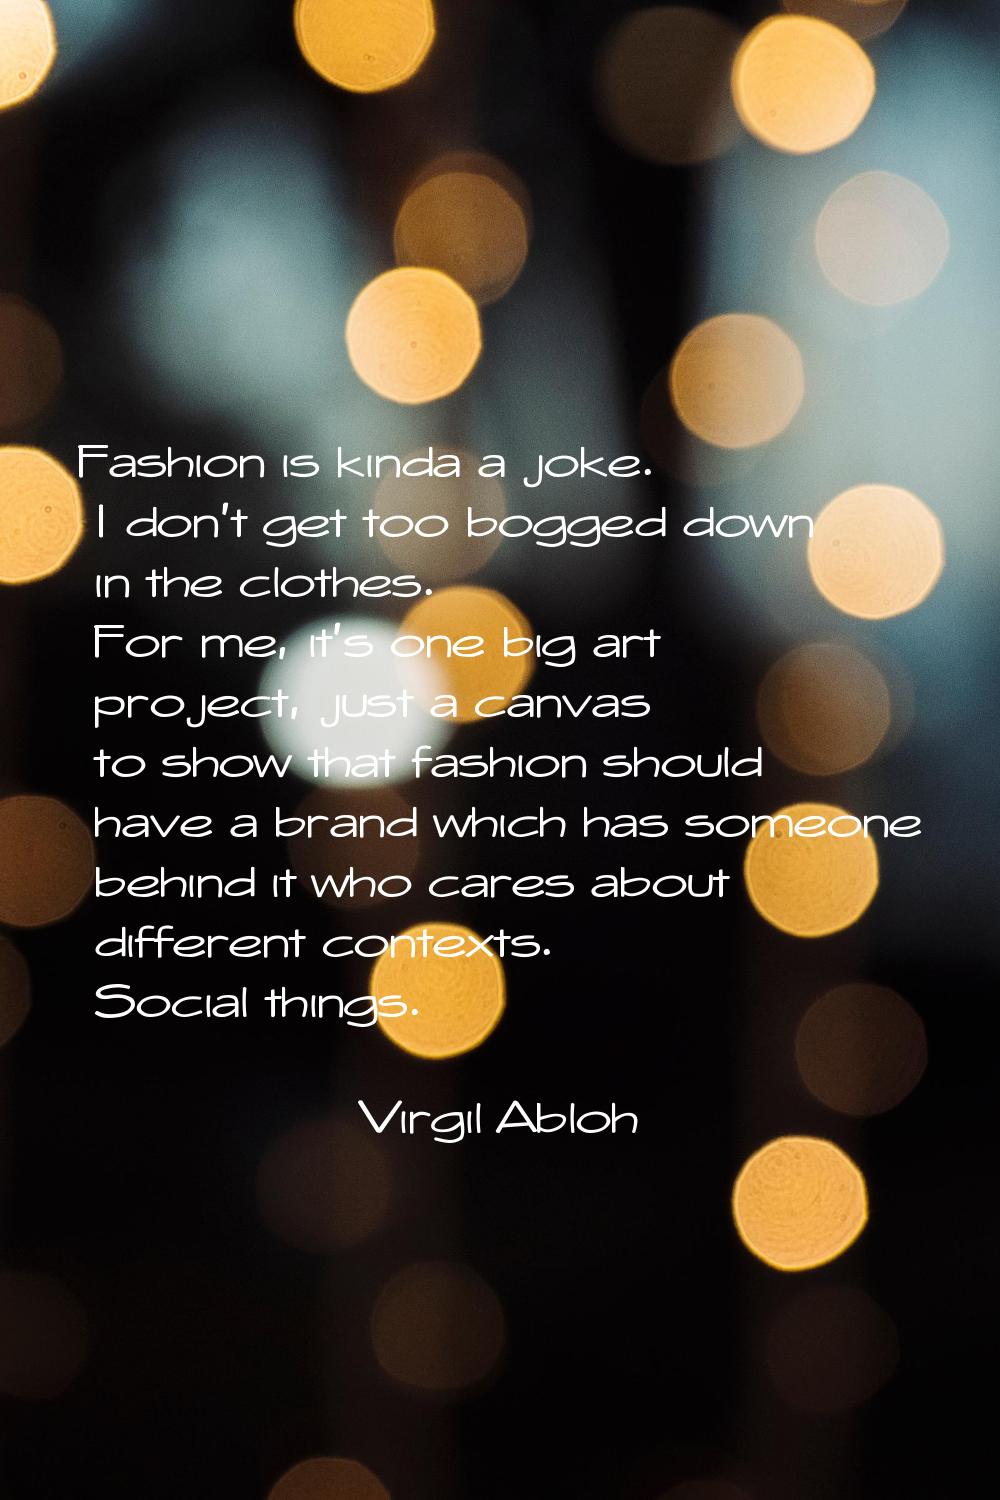 Fashion is kinda a joke. I don't get too bogged down in the clothes. For me, it's one big art proje